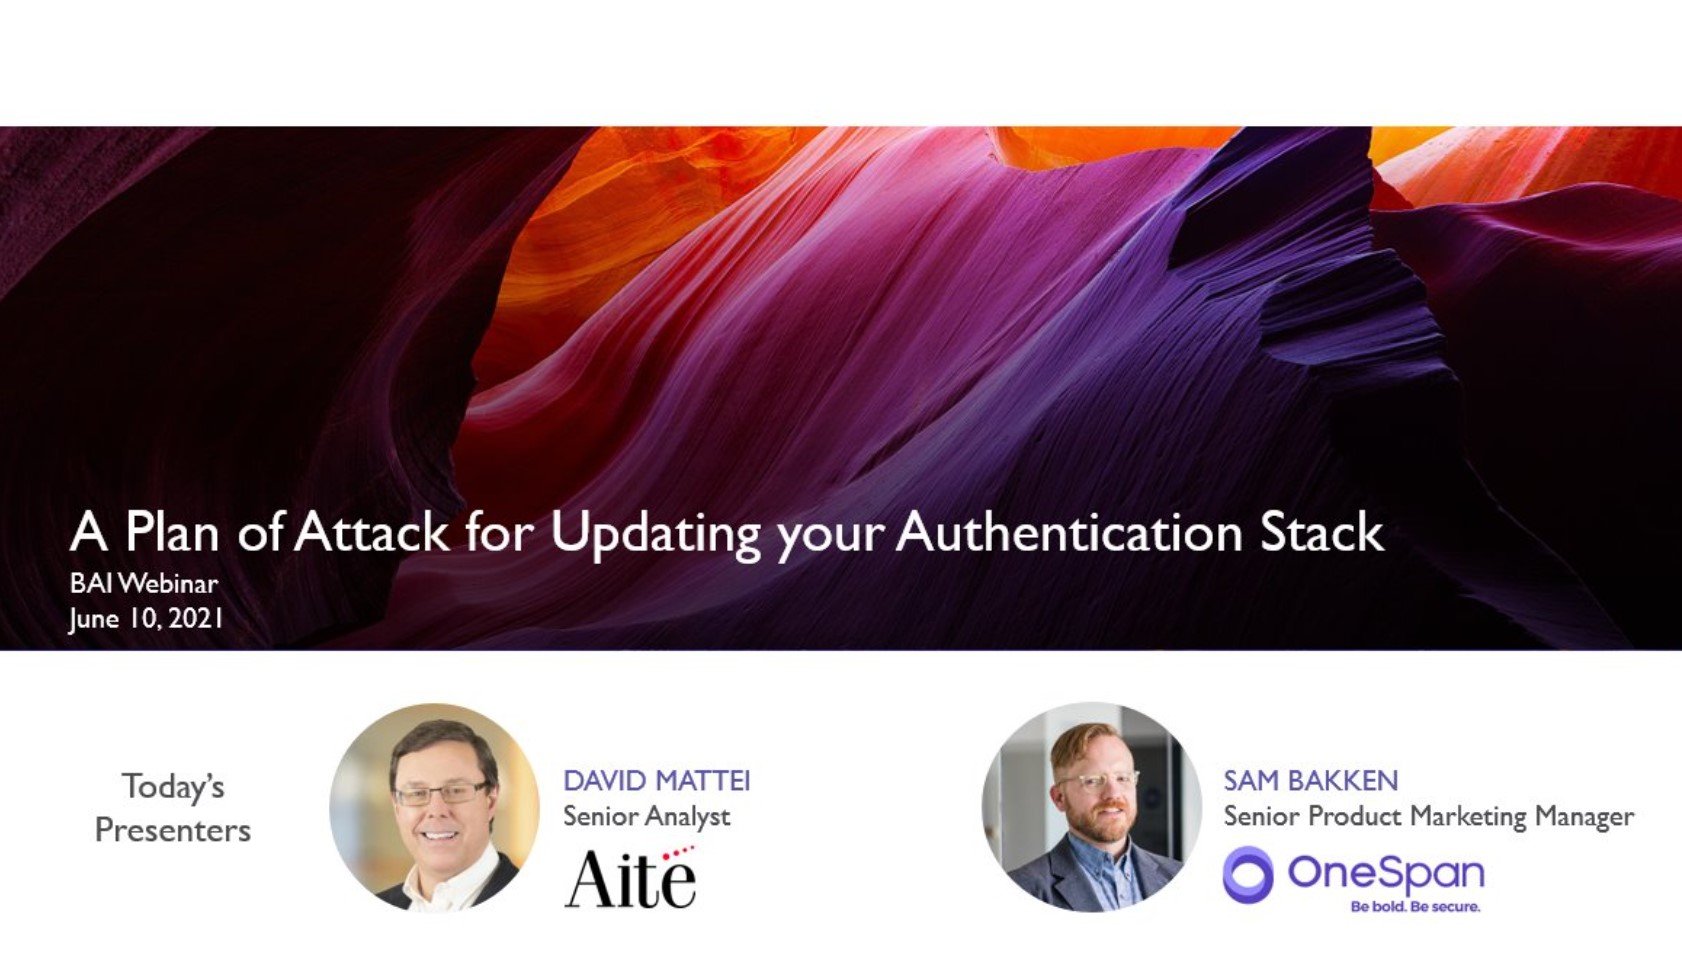 A Plan of Attack for Updating your Authentication Stack